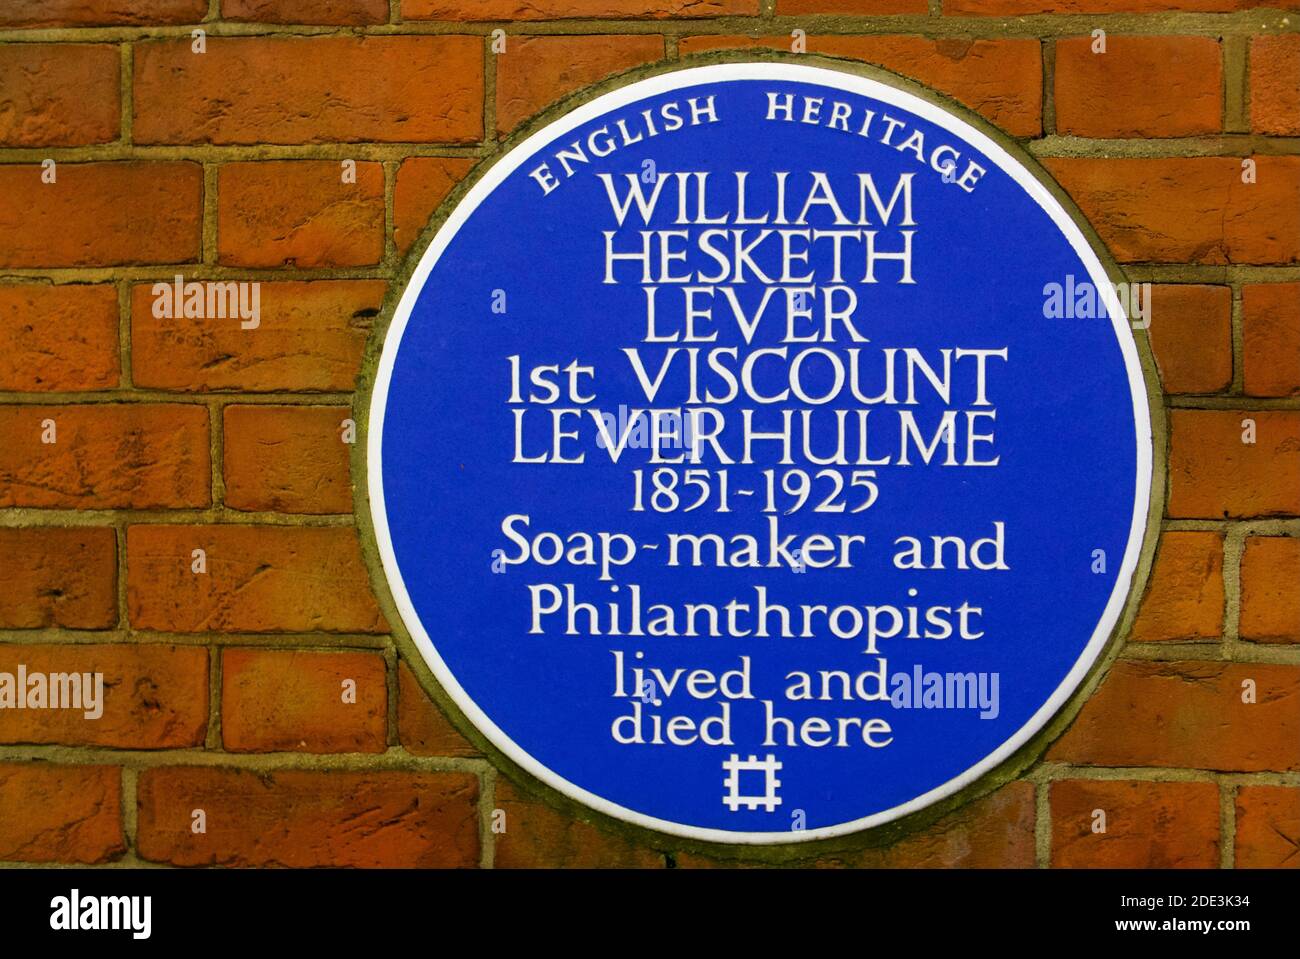 William Hesketh Lever, 1st Viscount Leverhulme, blue plaque by English Heritage in Hampstead Village near the Heath. Inverforth House. Stock Photo